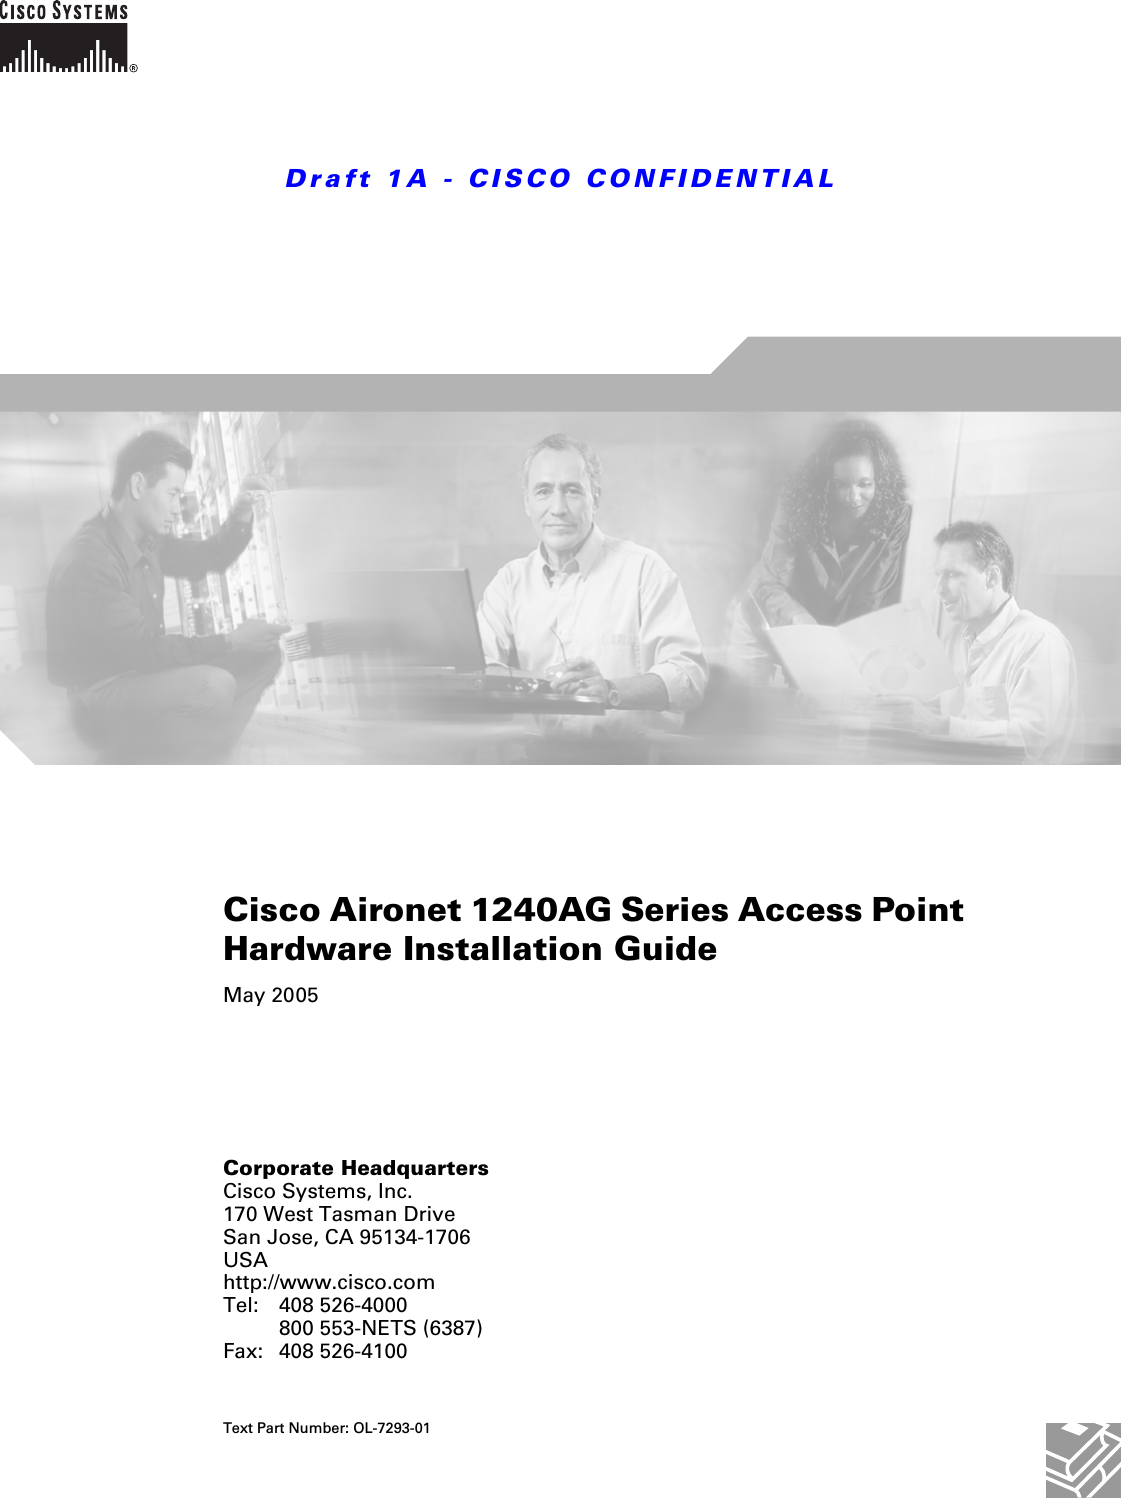 Draft 1A - CISCO CONFIDENTIALCorporate HeadquartersCisco Systems, Inc.170 West Tasman DriveSan Jose, CA 95134-1706 USAhttp://www.cisco.comTel: 408 526-4000800 553-NETS (6387)Fax: 408 526-4100Cisco Aironet 1240AG Series Access Point Hardware Installation Guide May 2005Text Part Number: OL-7293-01